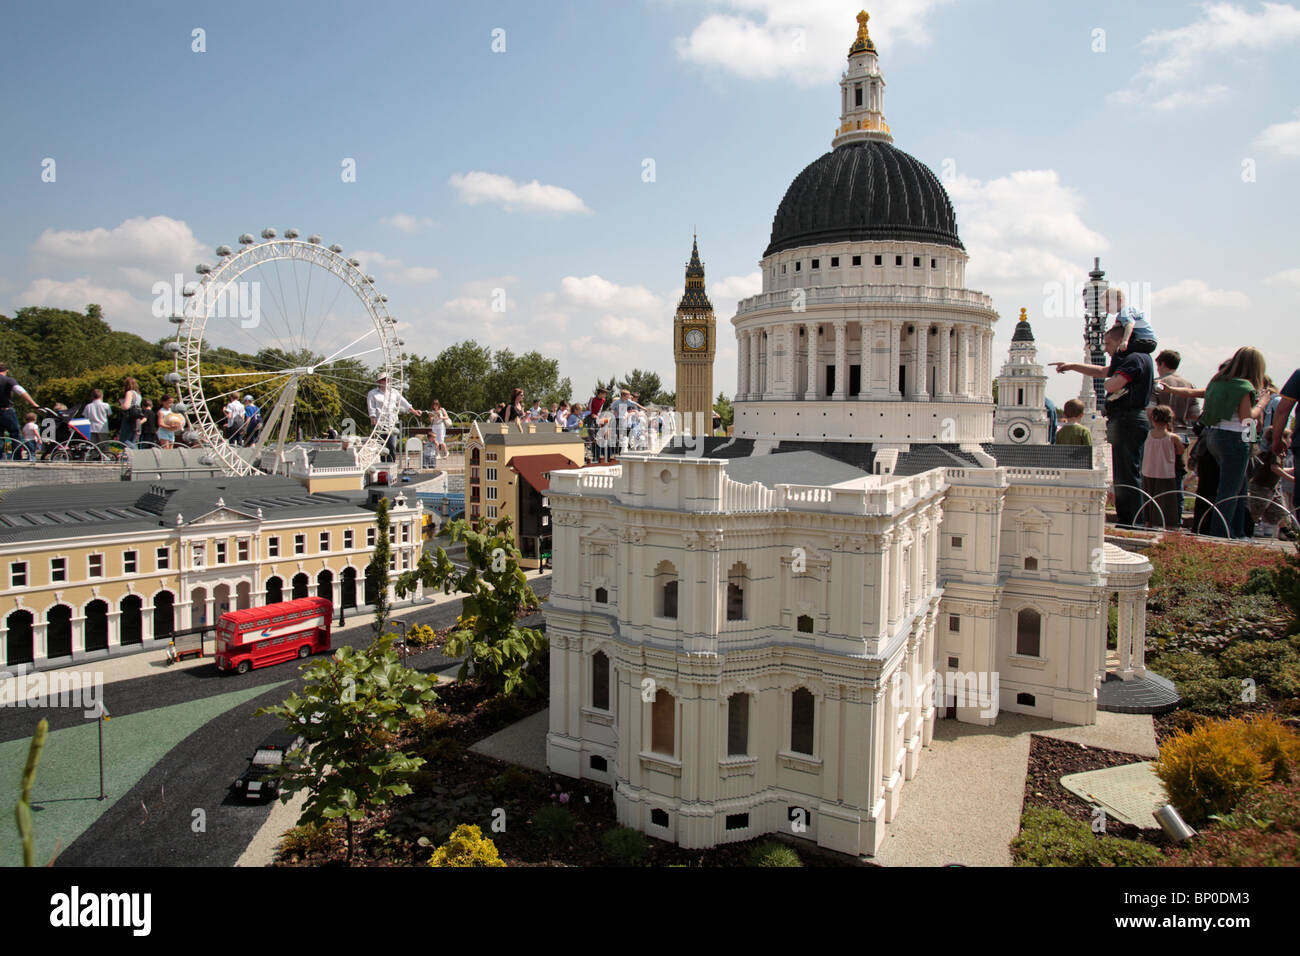 England, Berkshire, Windsor. Details of London at Legoland showing St Paul's Cathedral, Big Ben and the London Eye. Stock Photo